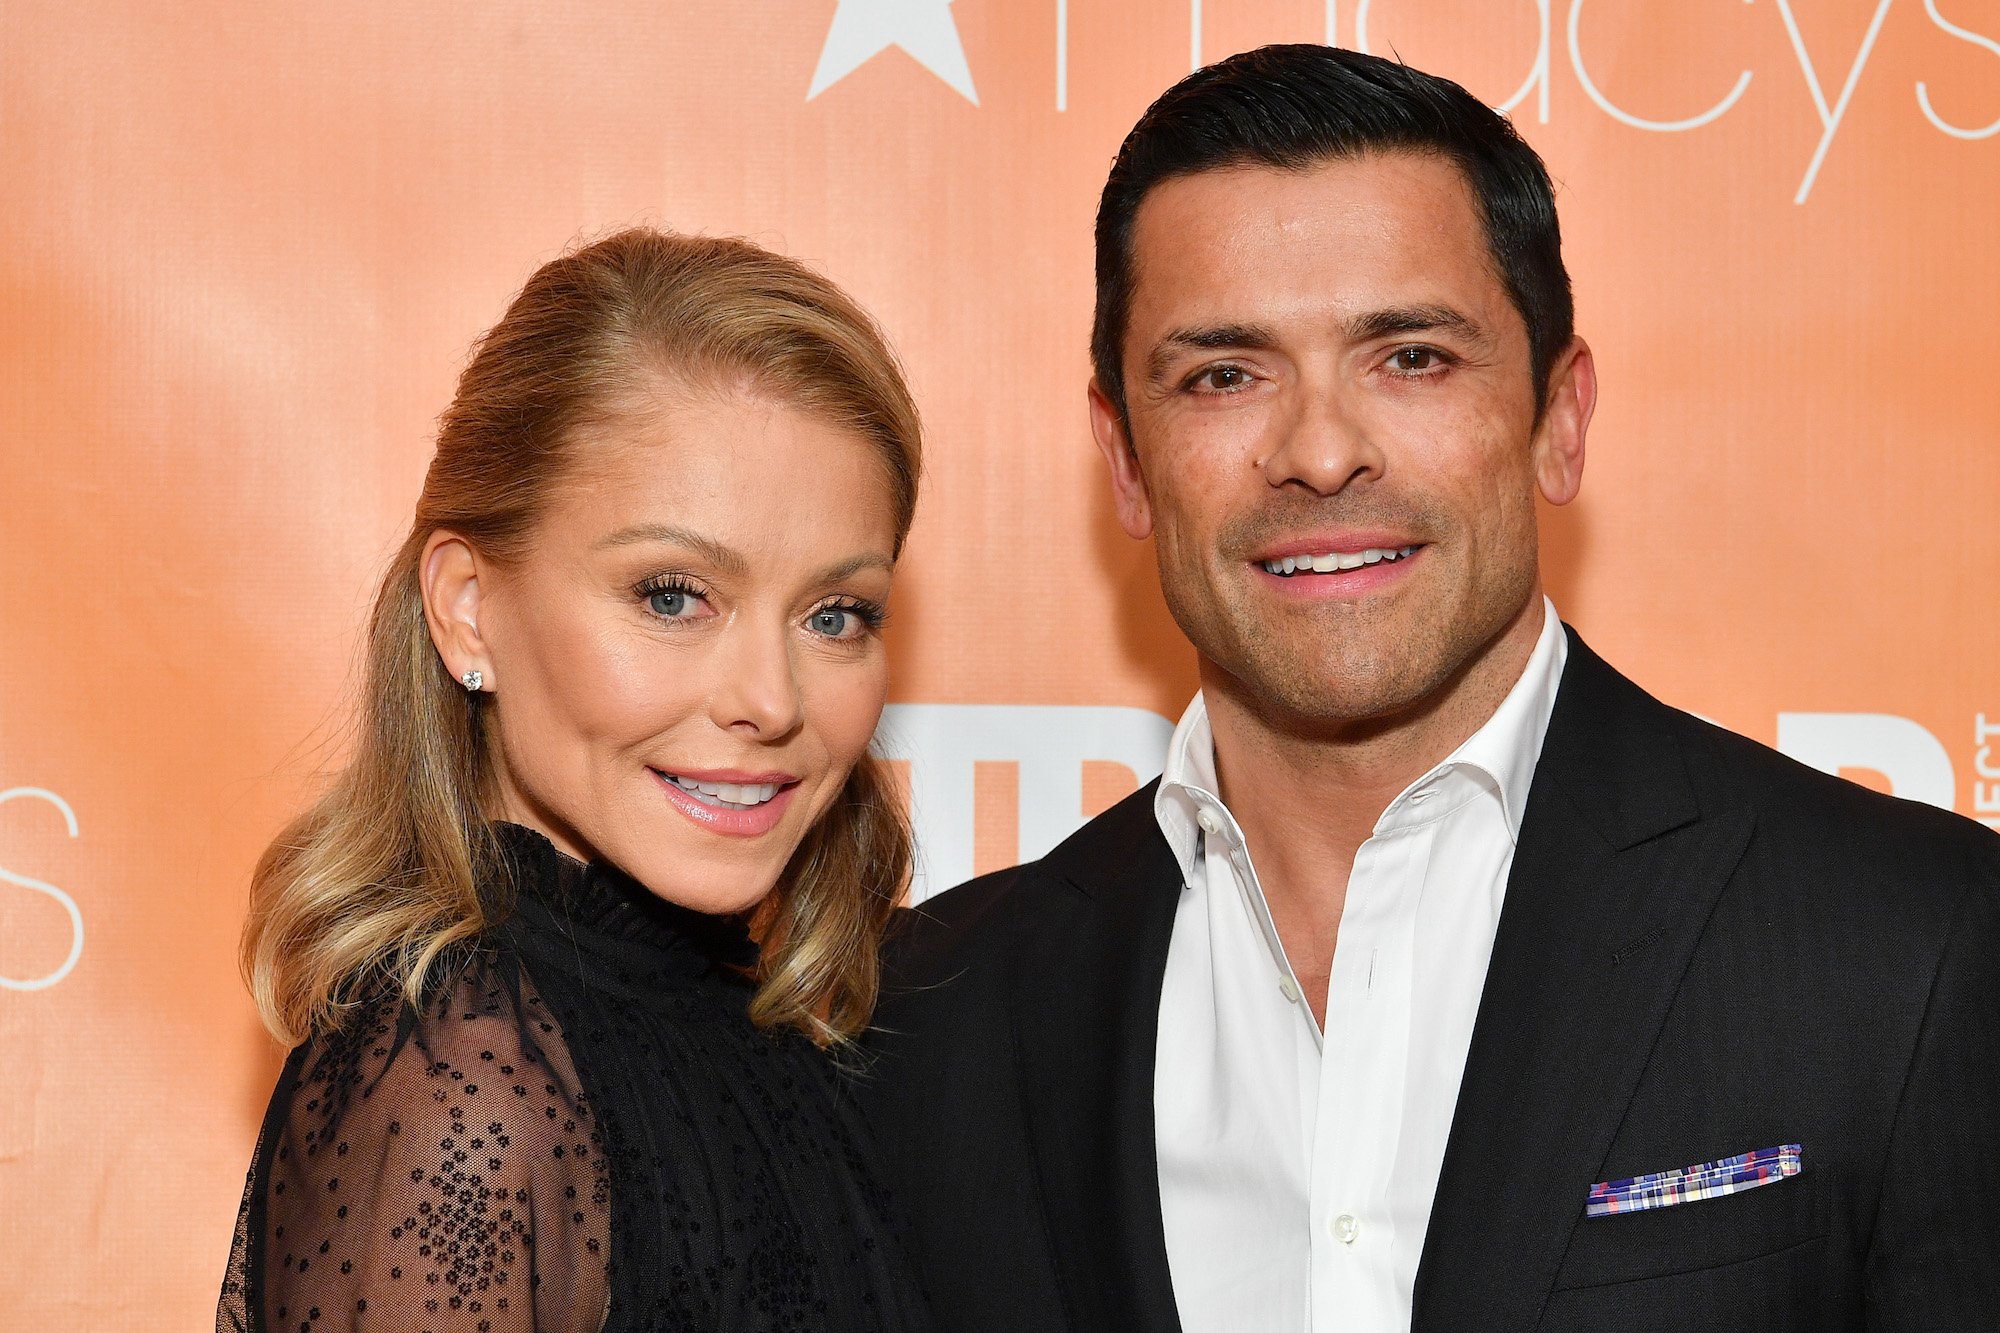 Kelly Ripa Once Passed Out While Having Sex With Mark Consuelos and Woke Up in the Hospital